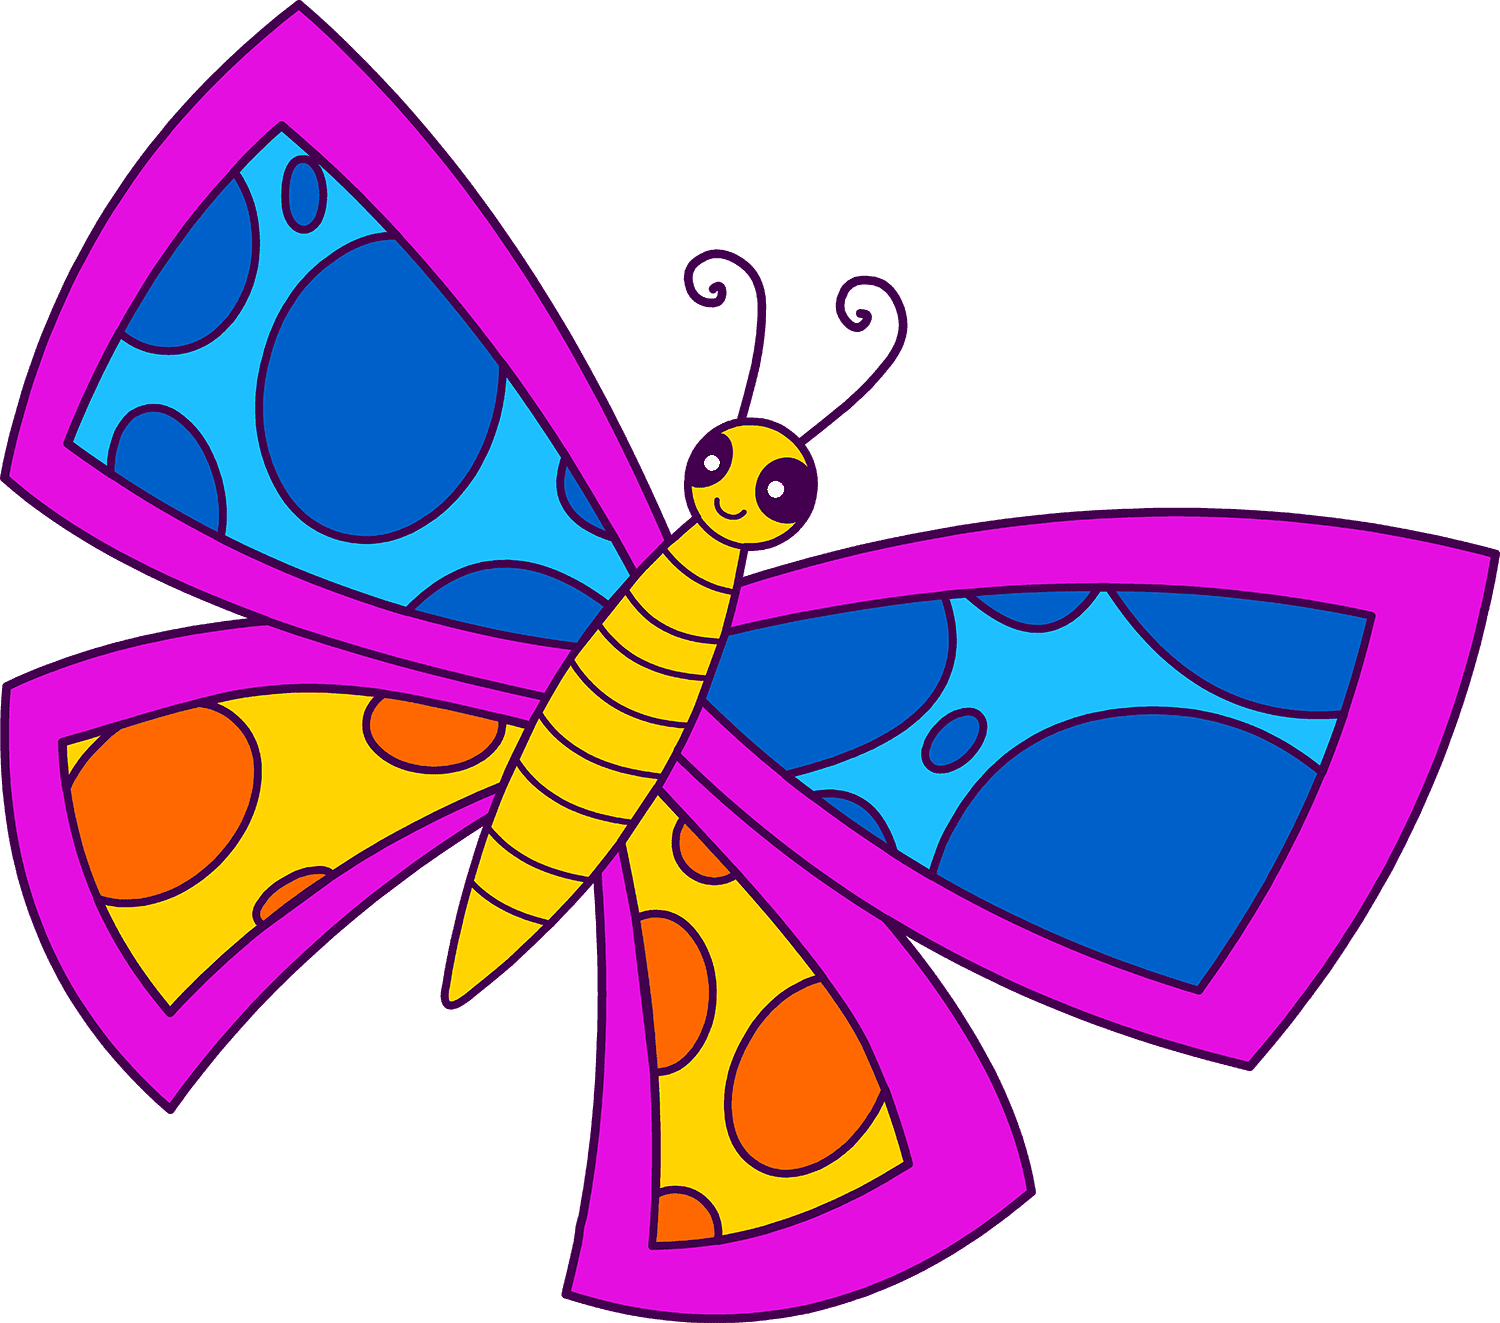 Free butterfly clipart.